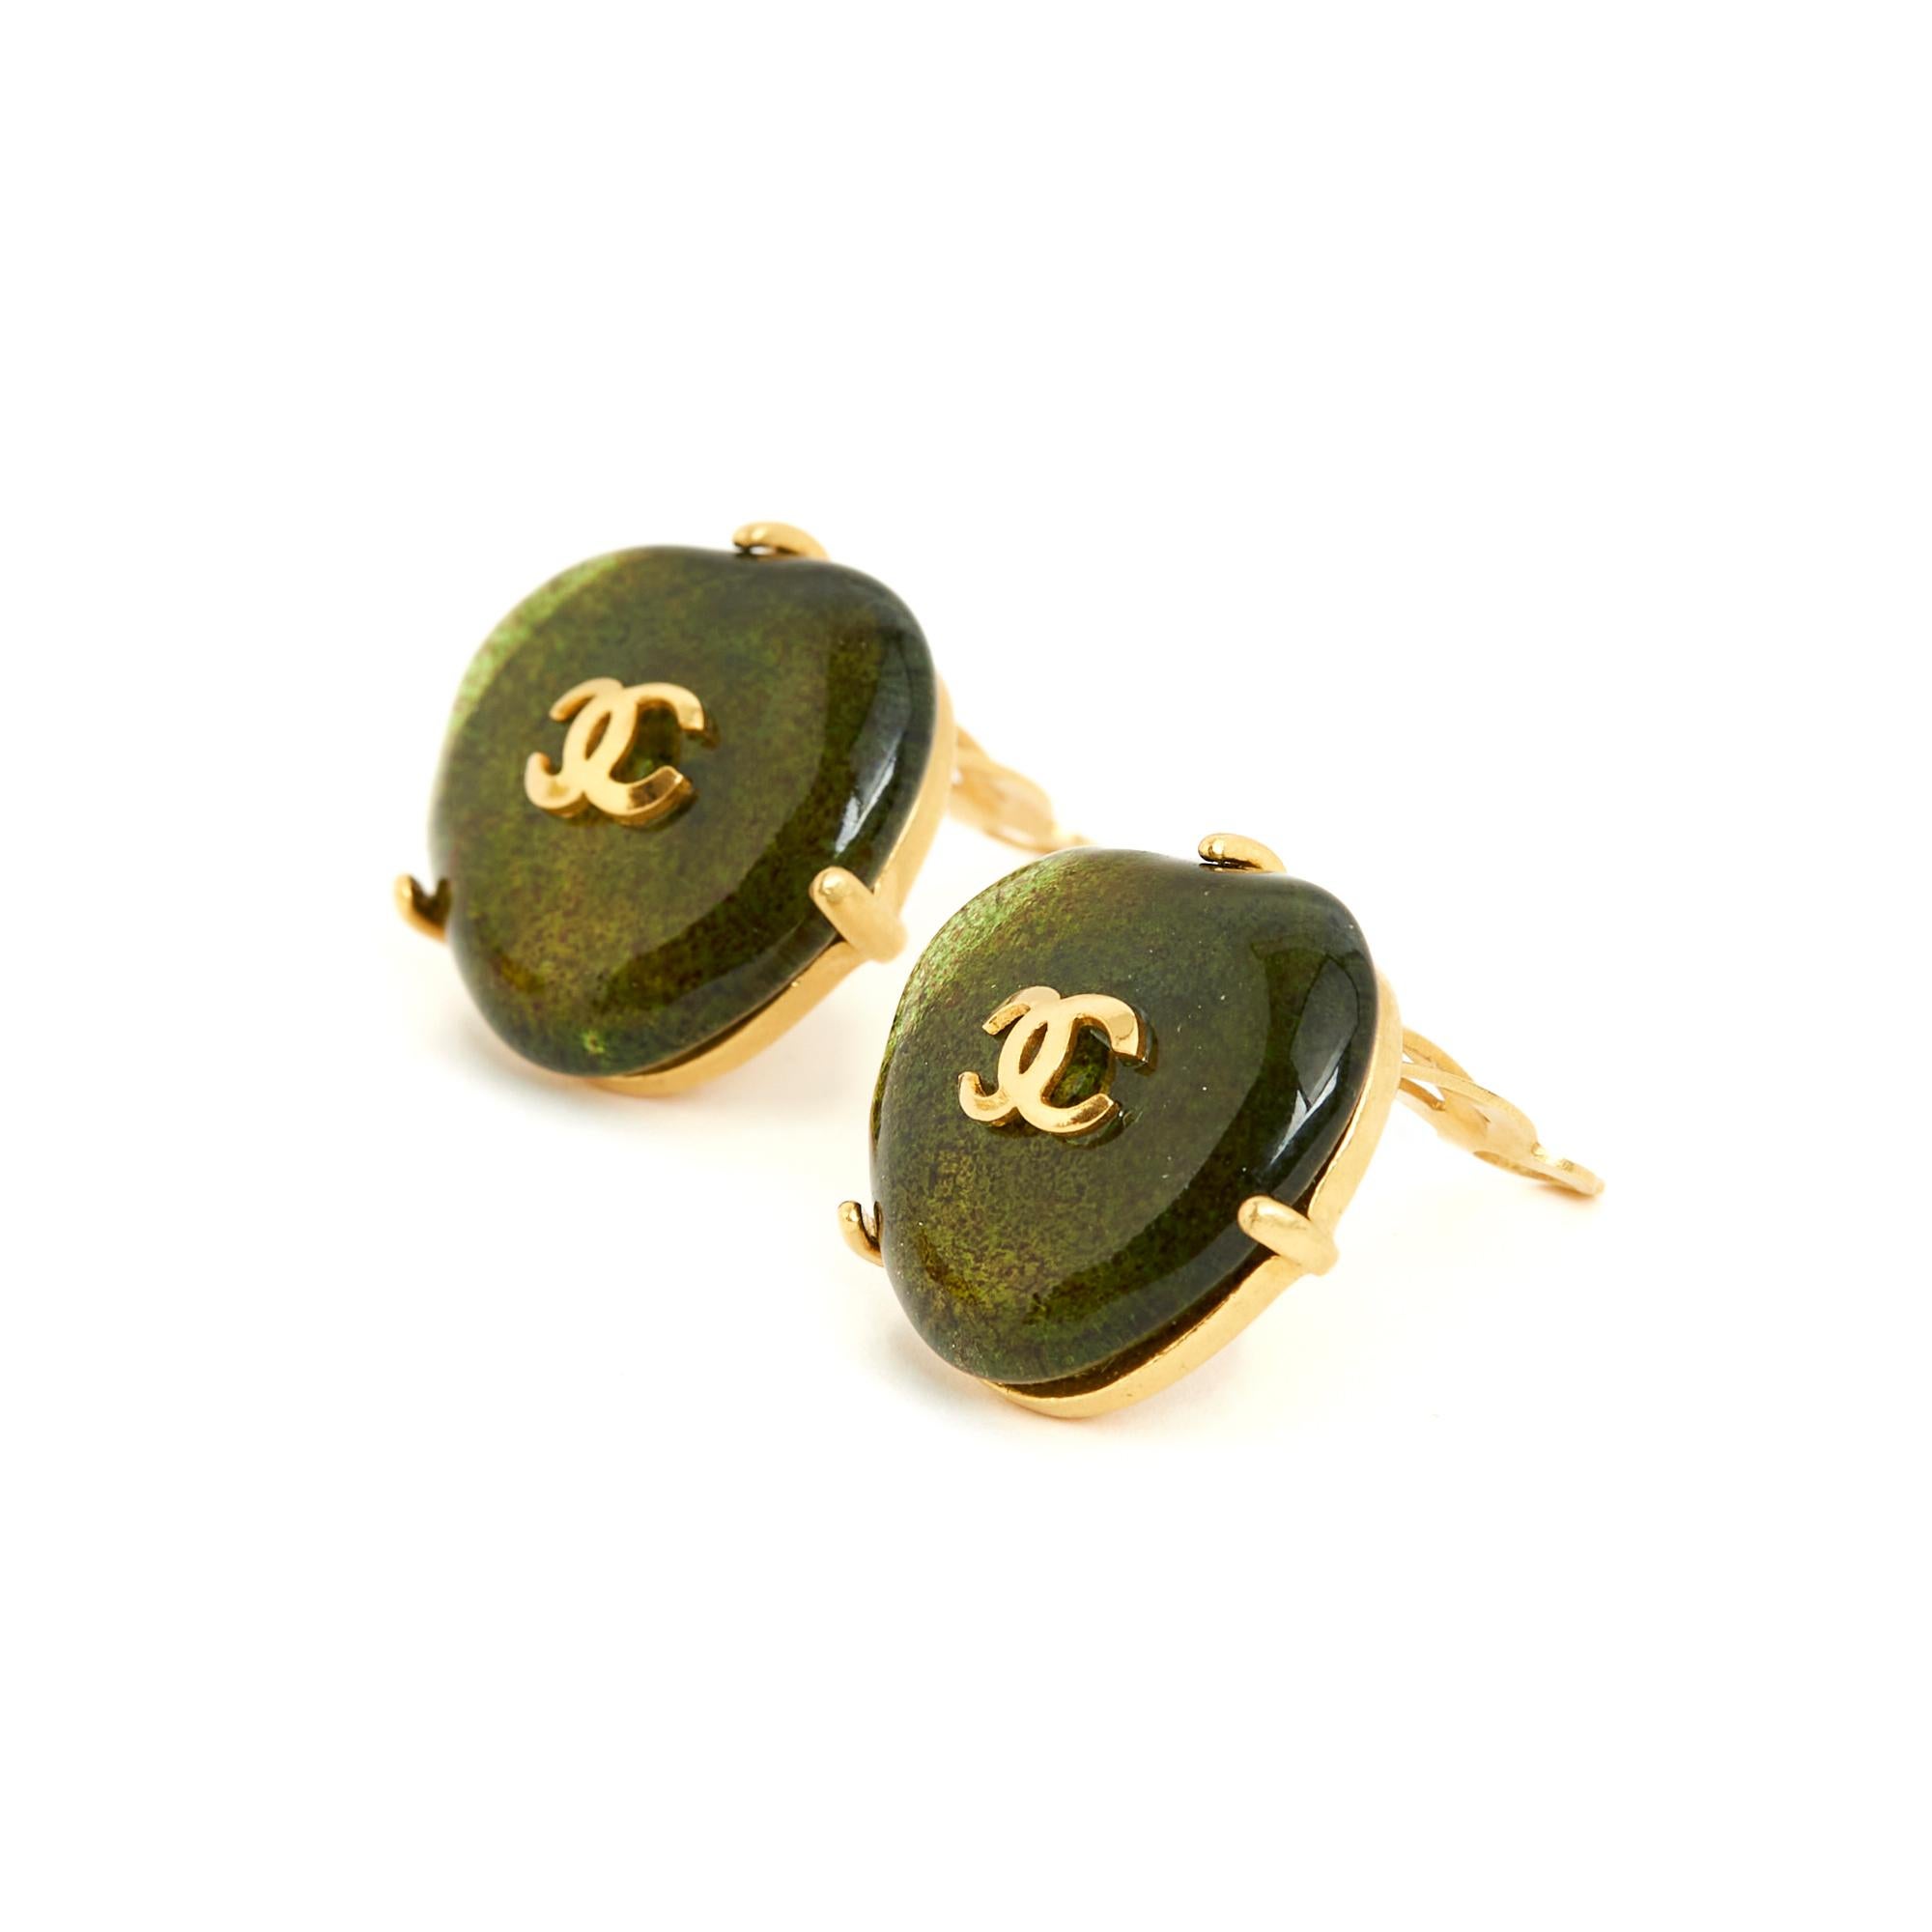 Chanel clip-on earrings from 1997 Spring Summer collection by Gripoix in glass paste topped with a small CC logo in gilded metal. Width 2.2cm x height 2.2cm. The earrings are very vintage, they are delivered without invoice or original packaging but